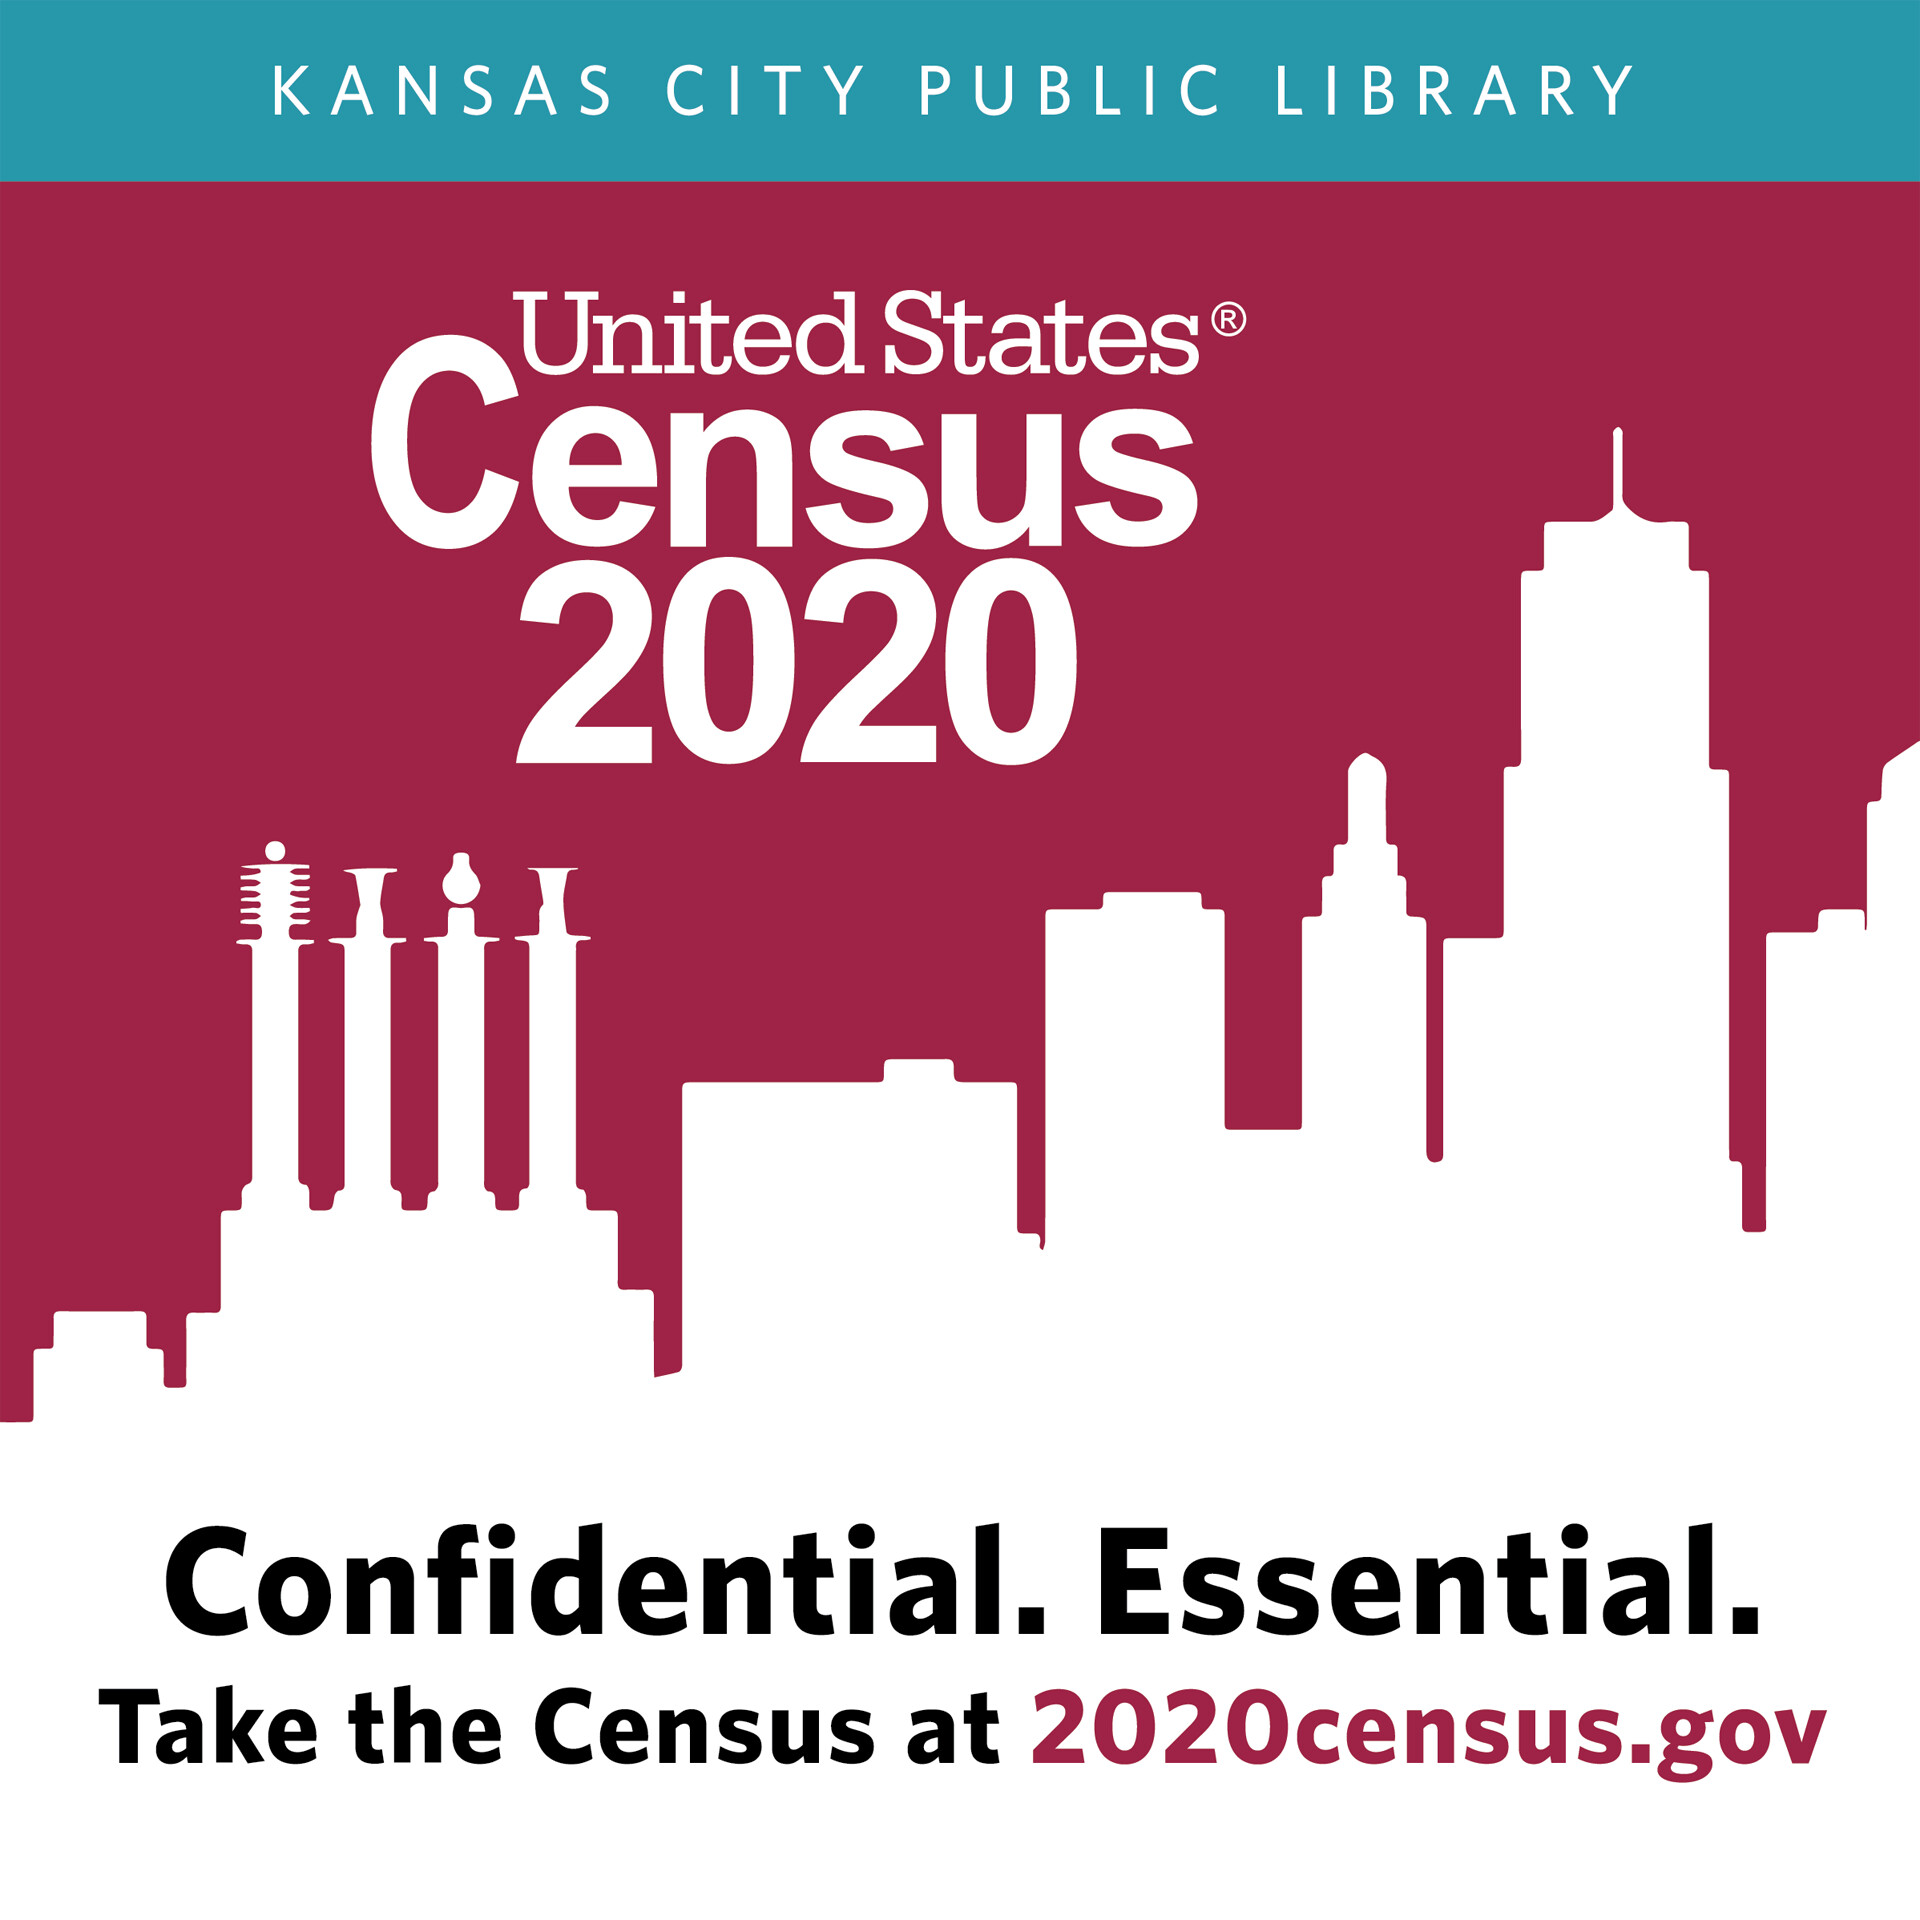 Census 2020 Library Promotional Materials